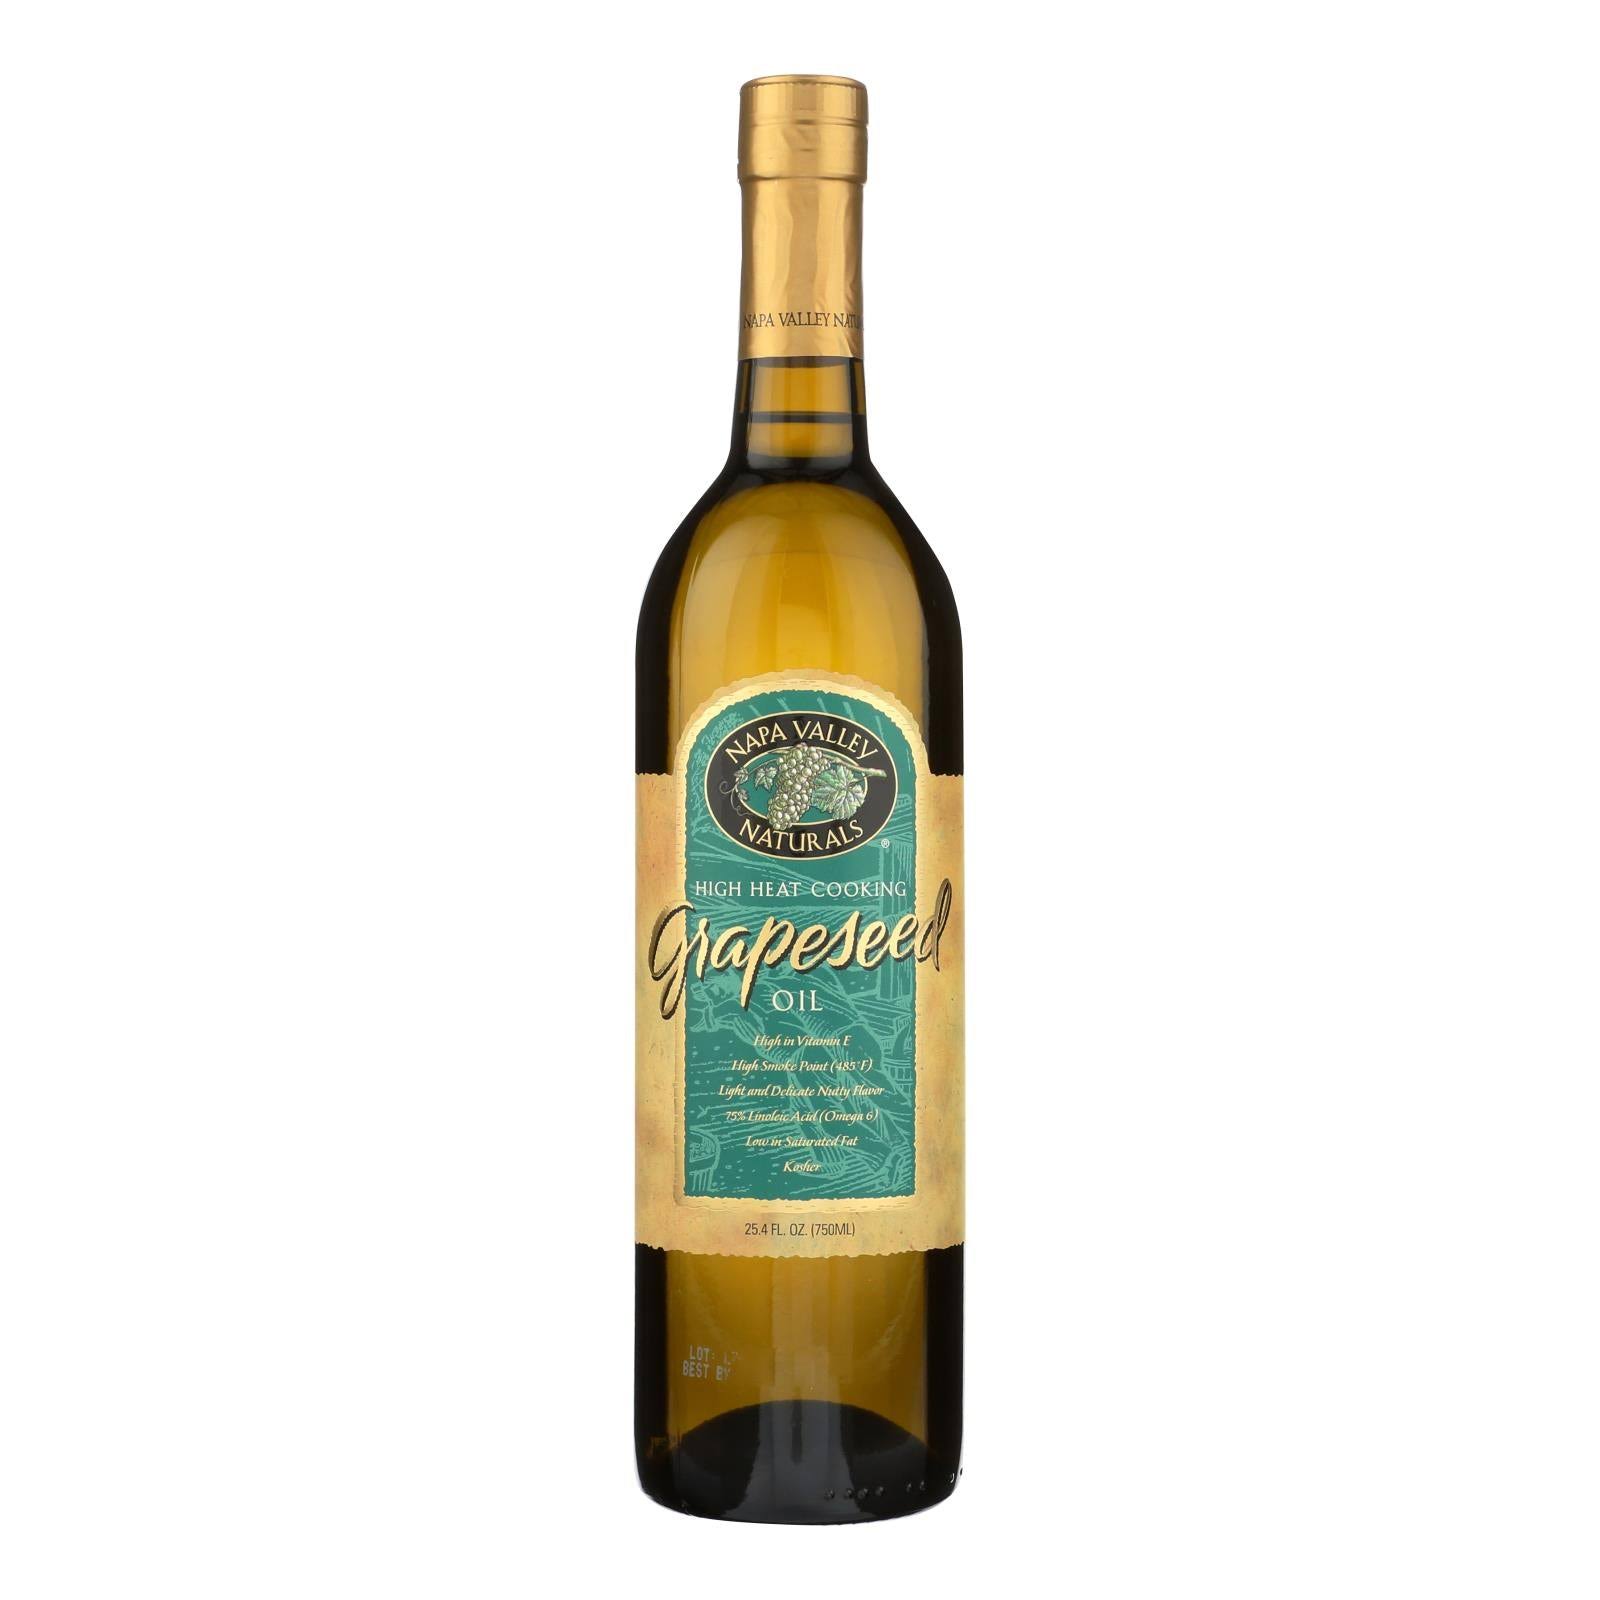 Napa Valley Naturals Grapeseed Oil - 25.4oz, Pack of 12